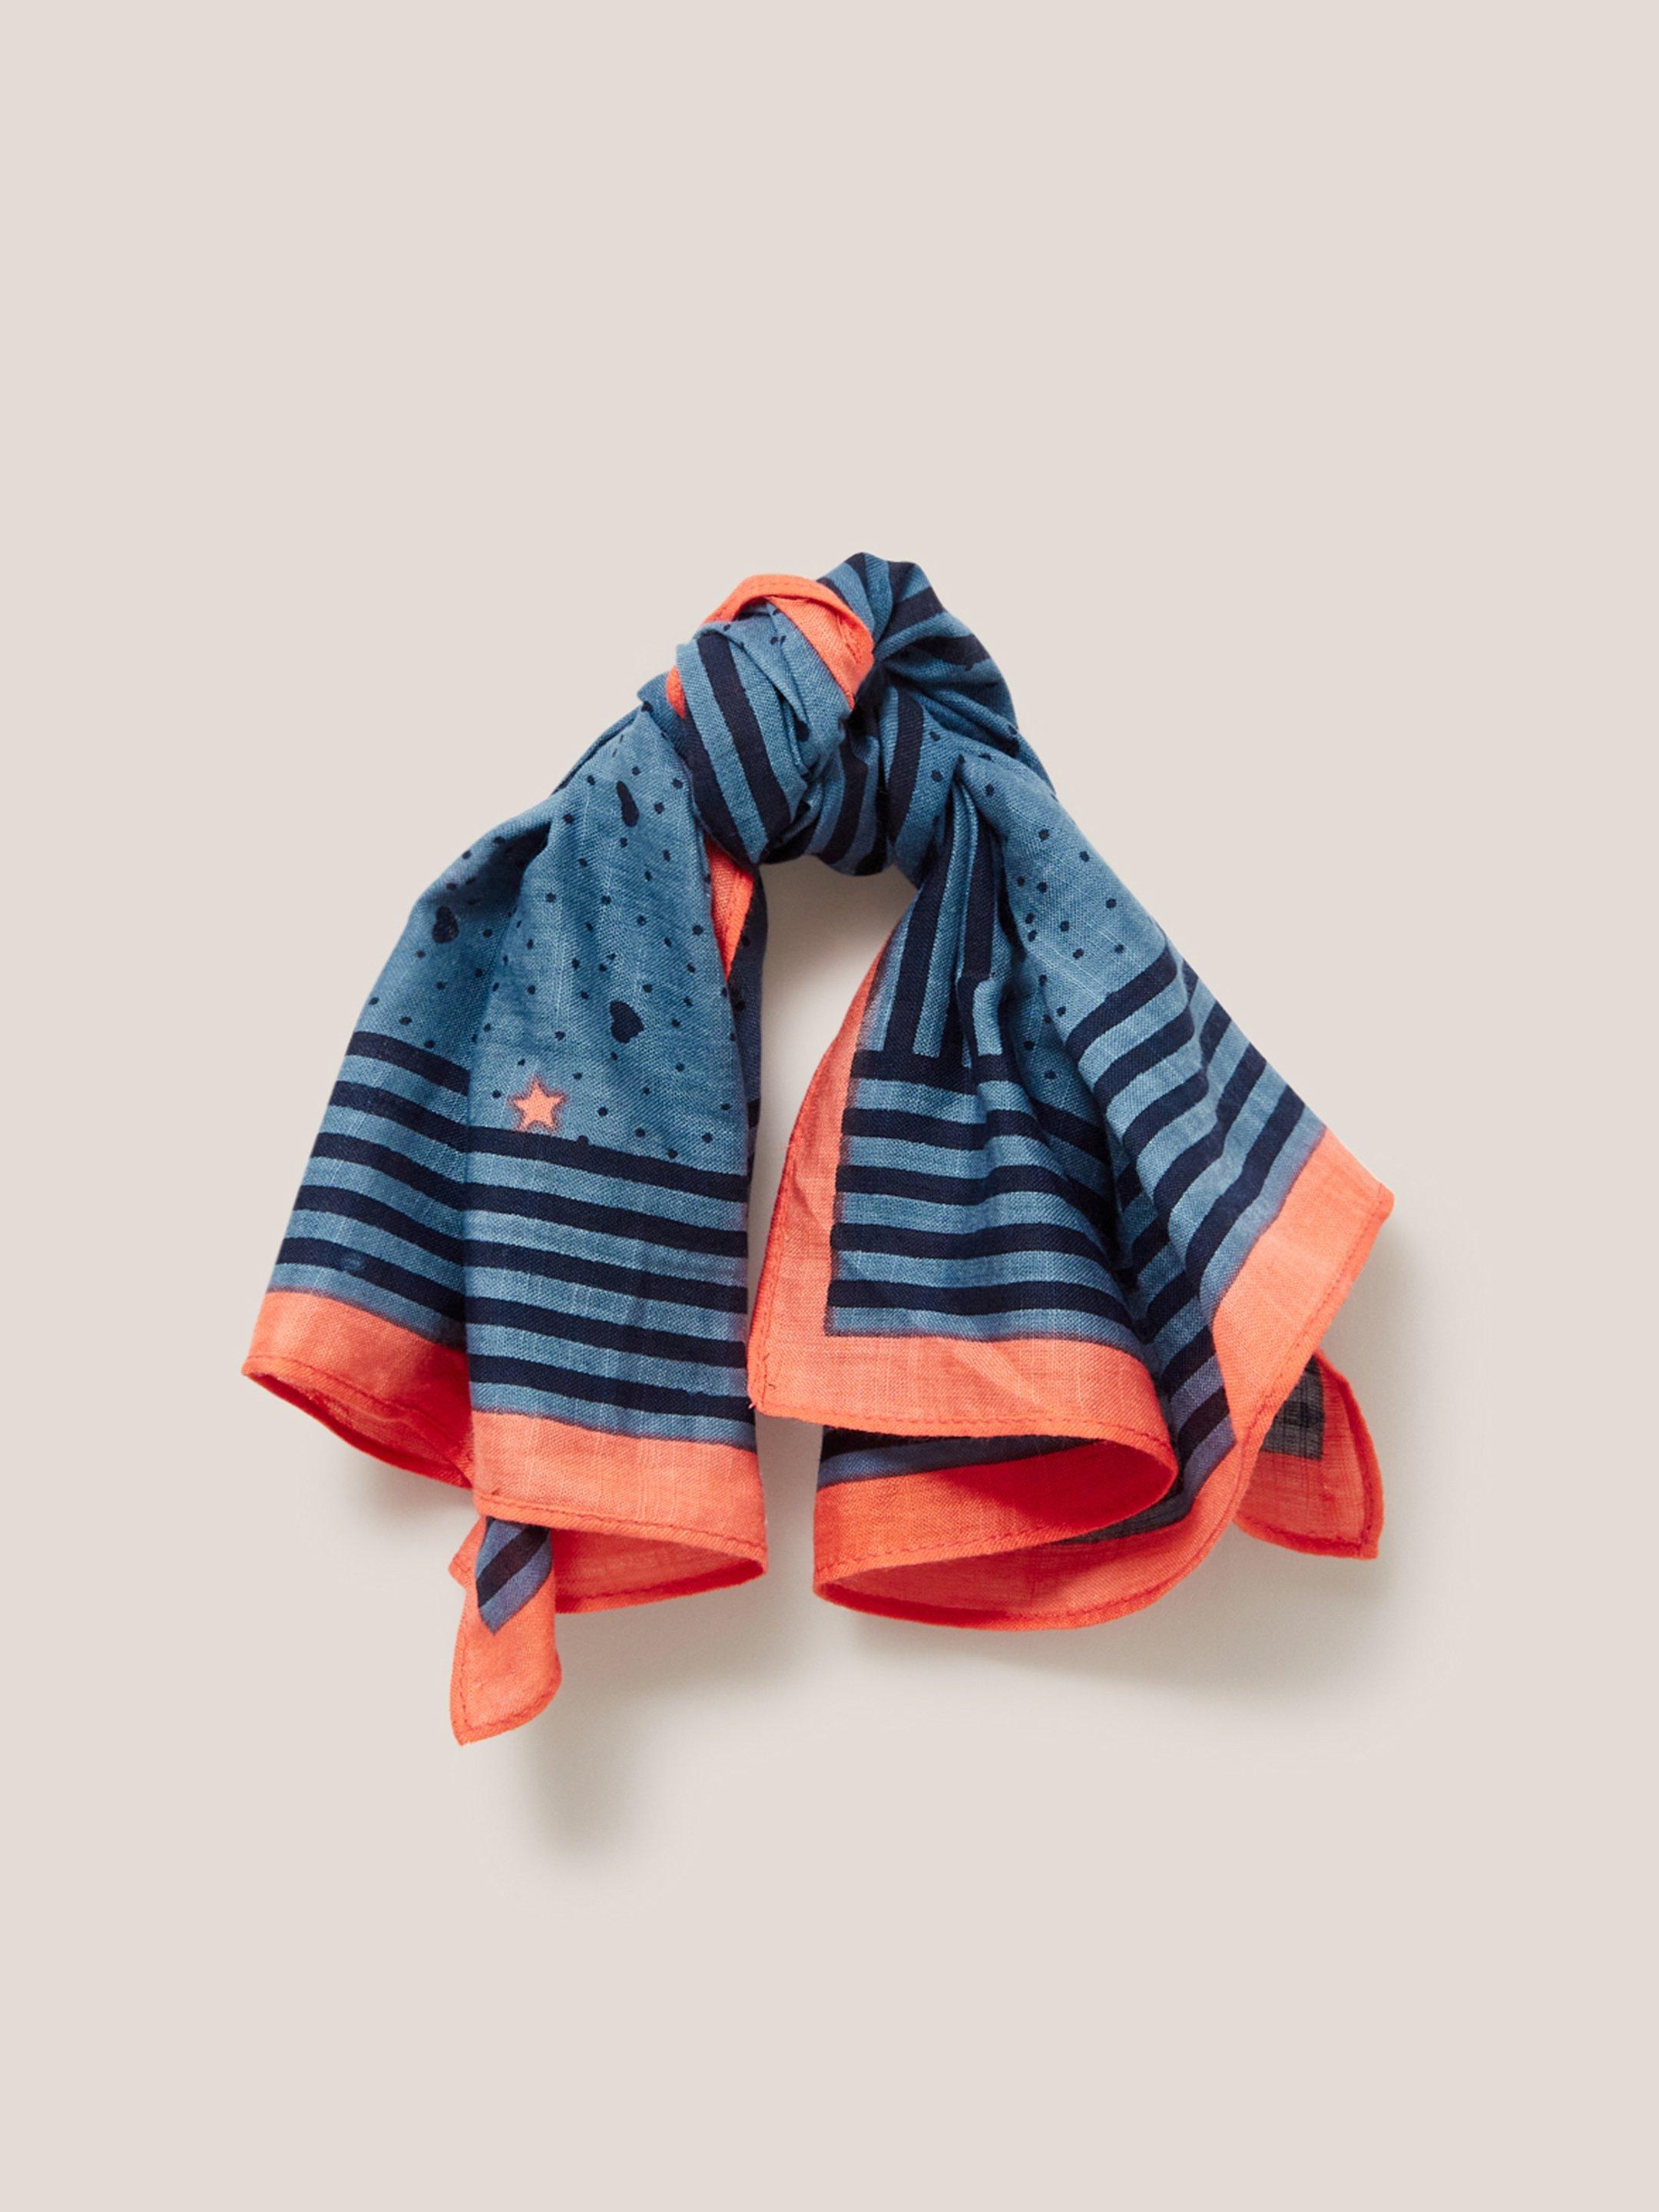 Heart Print Square Scarf in BLUE MLT - FLAT FRONT